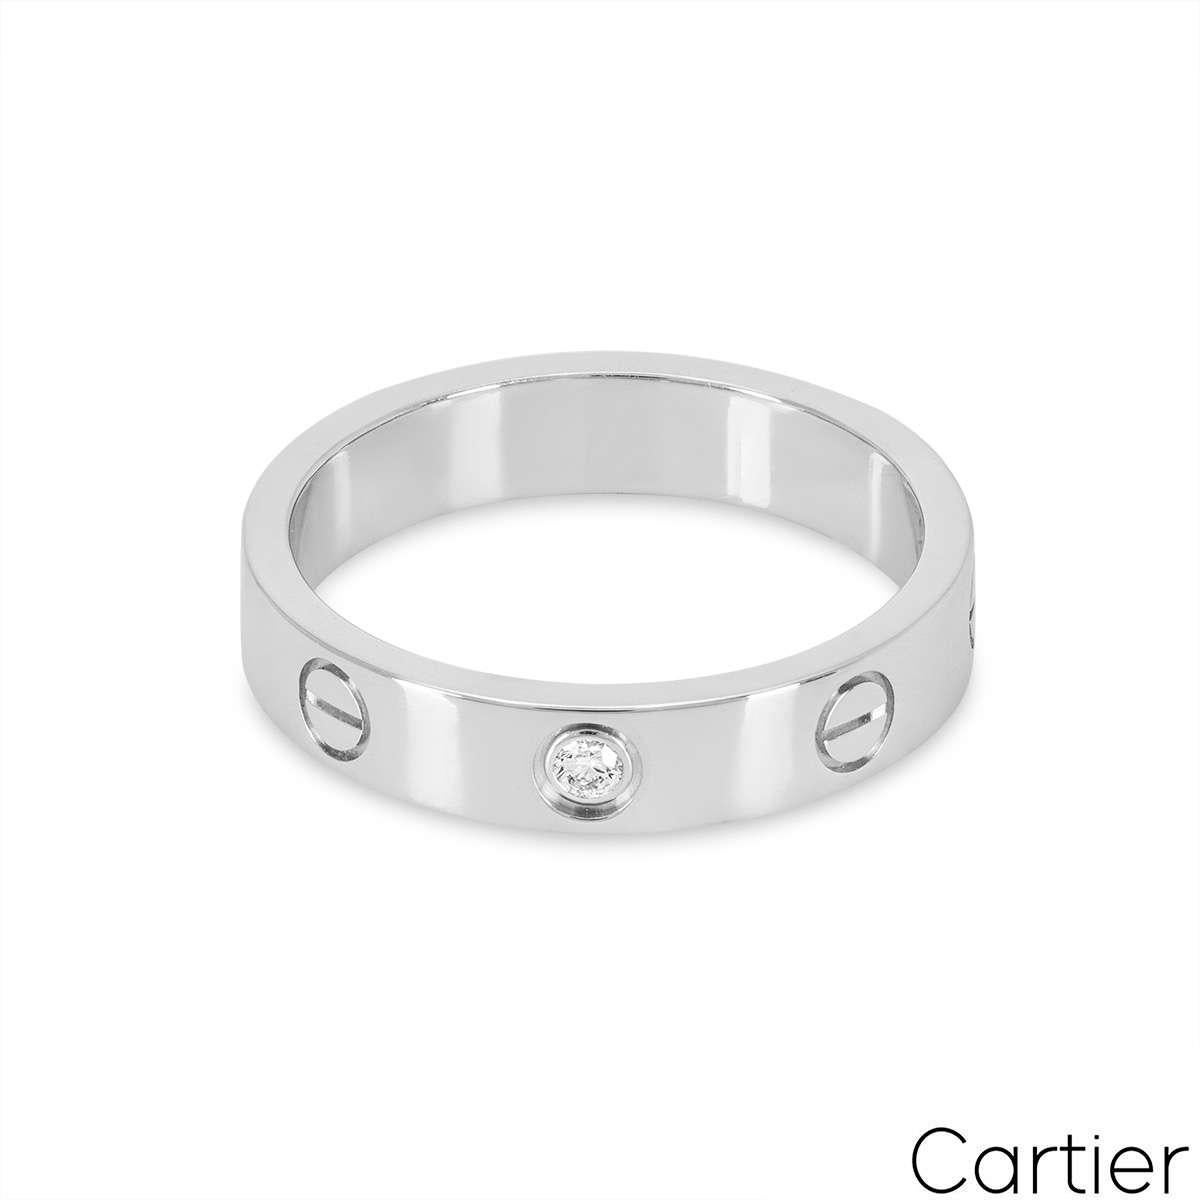 Cartier White Gold Diamond Love Wedding Band Size 53 B4050500 In Excellent Condition For Sale In London, GB